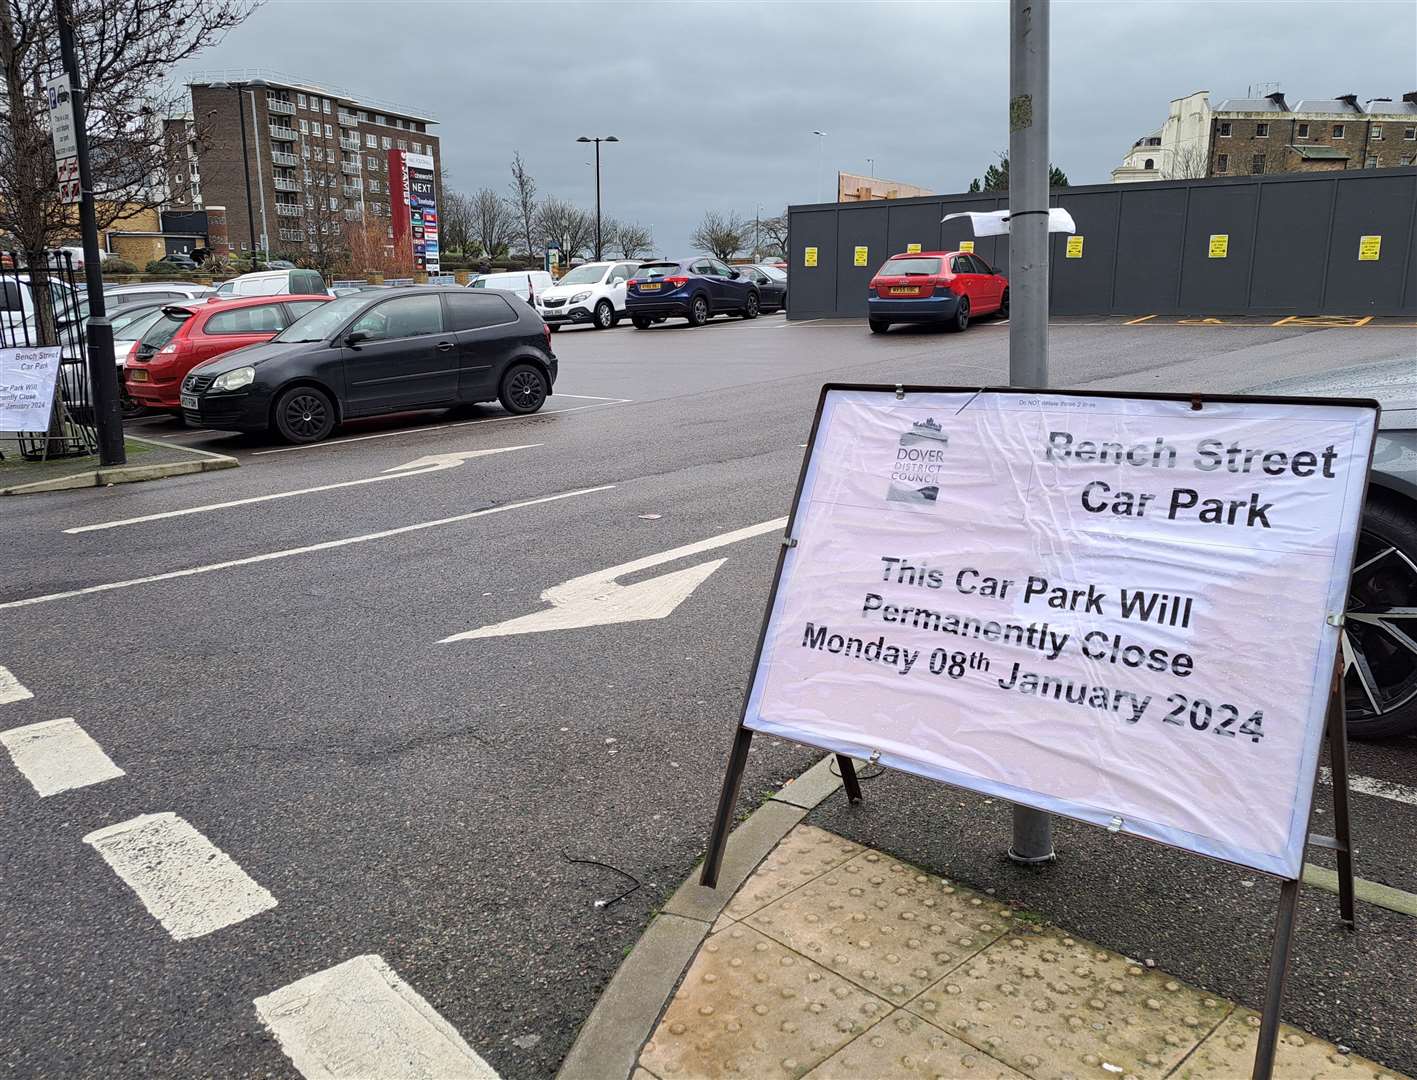 The Bench Street car park in Dover has closed for redevelopment